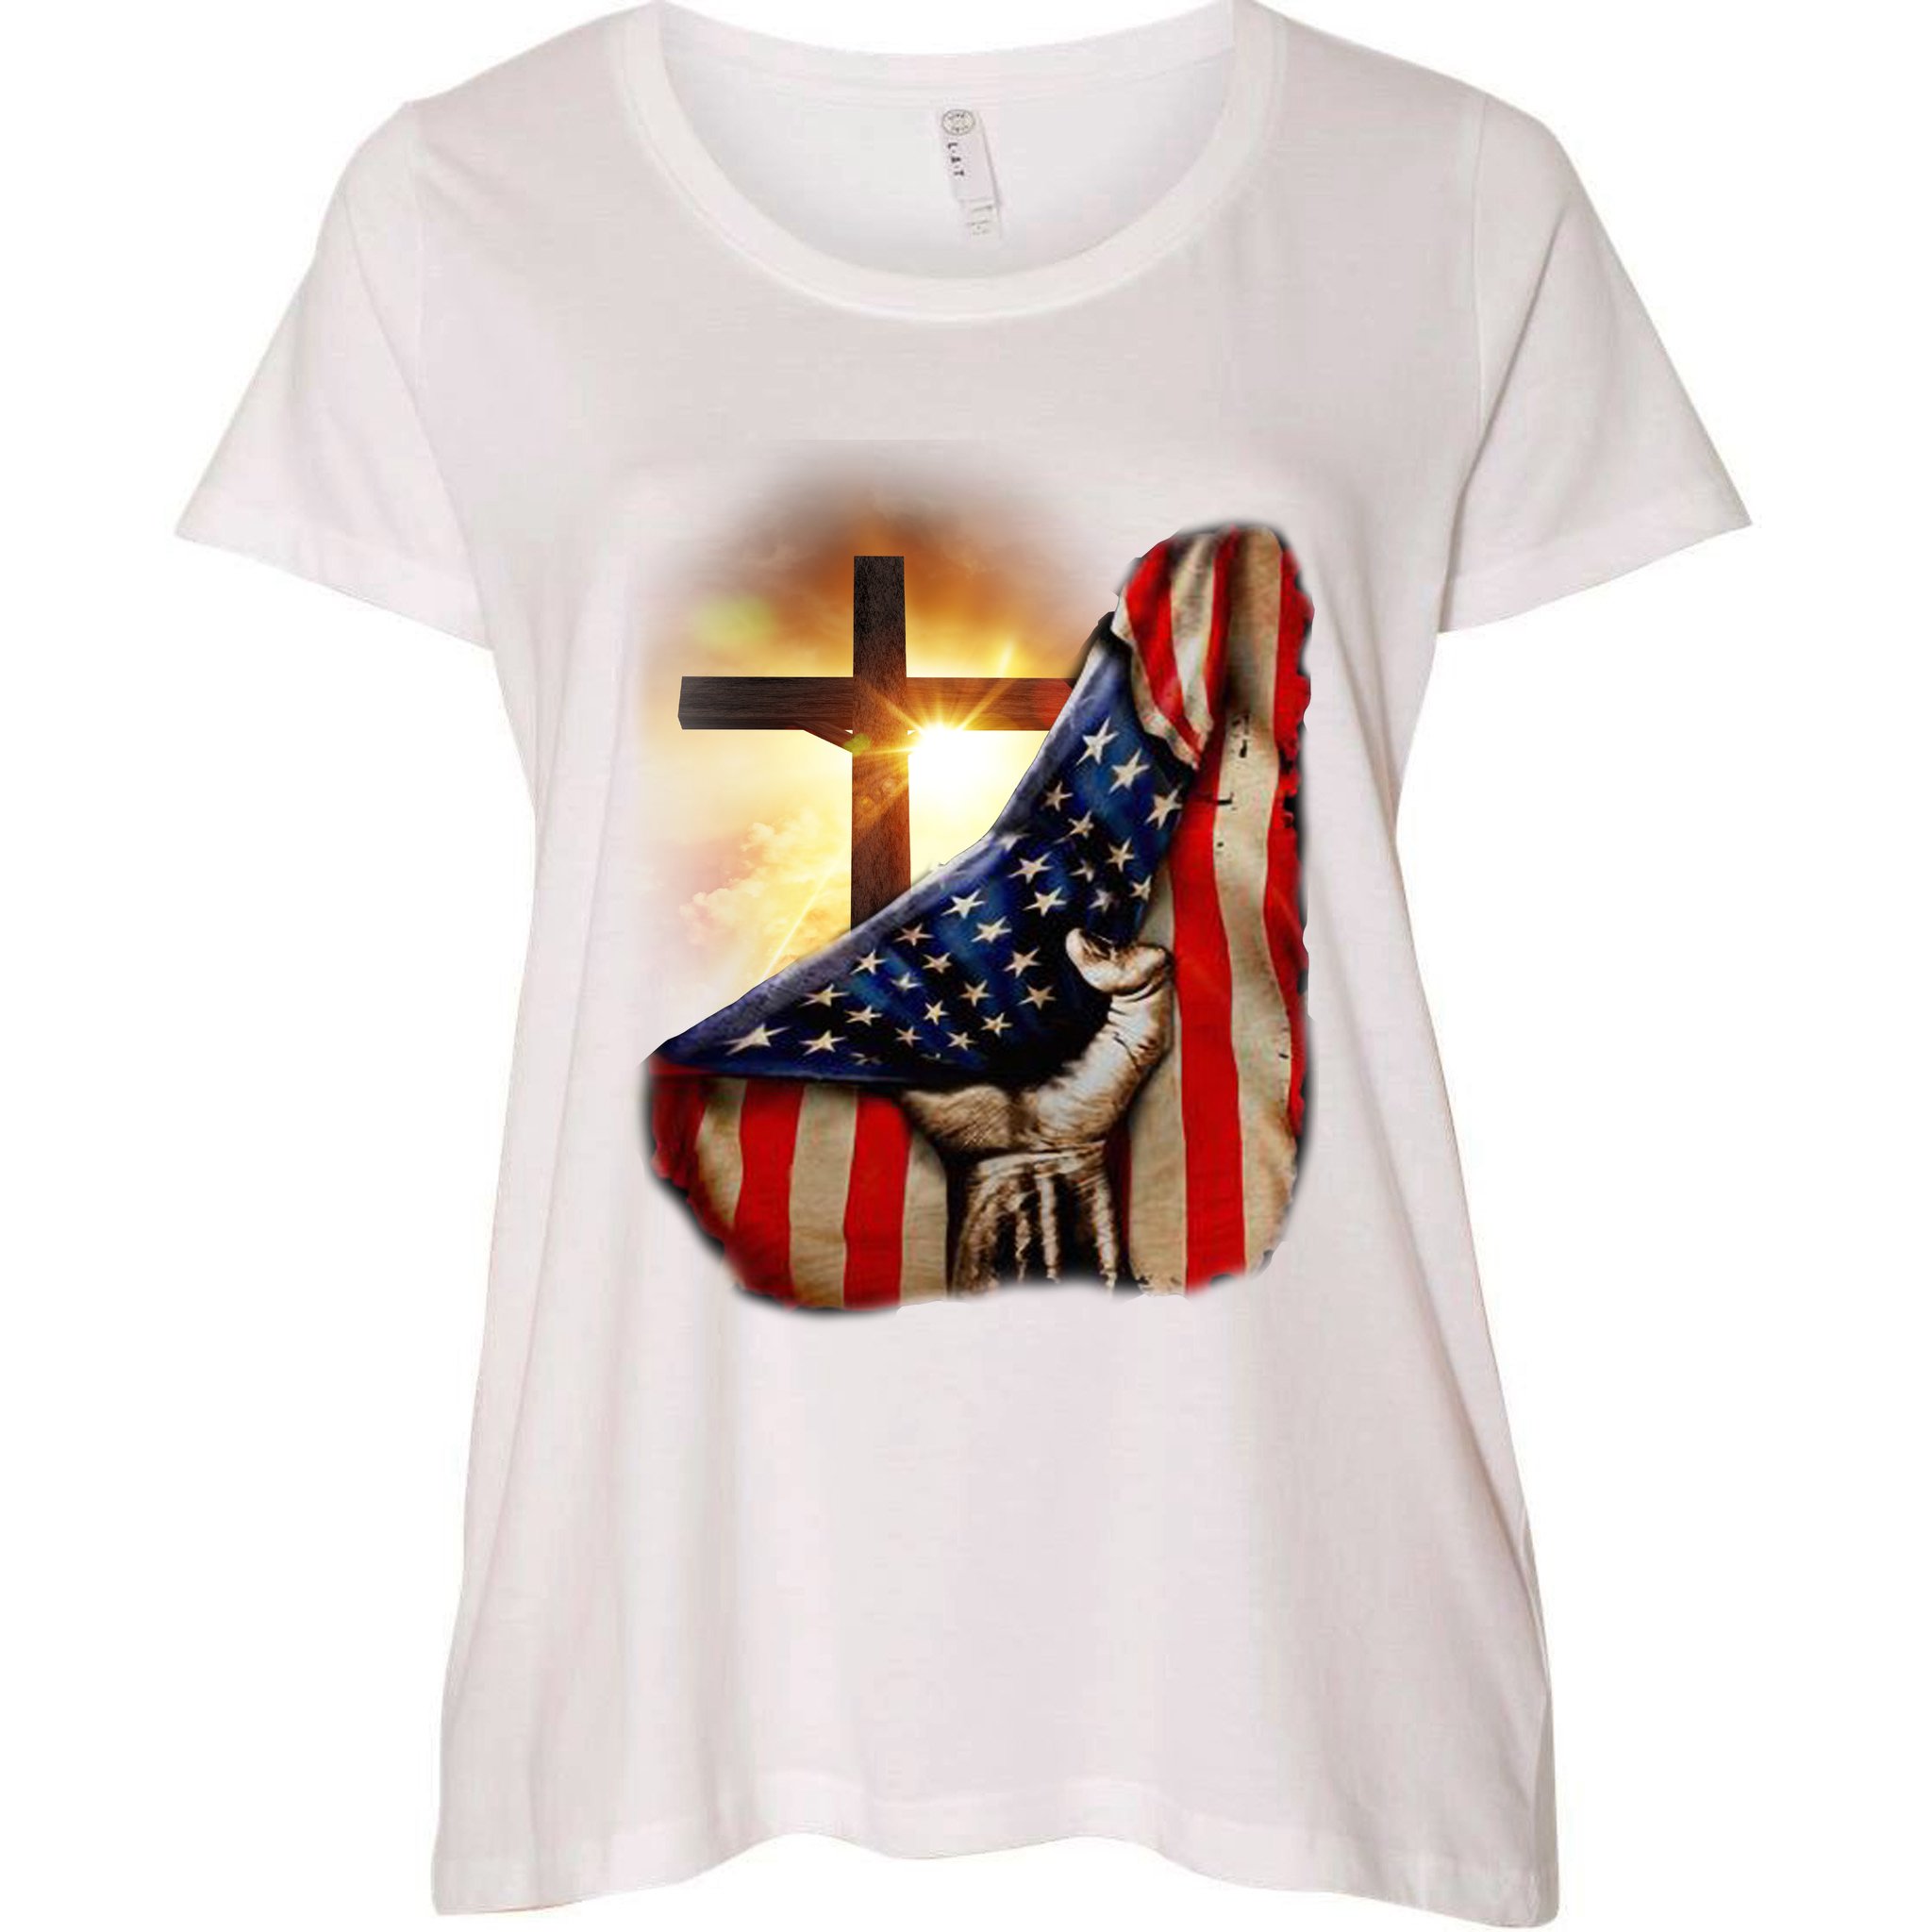 Freedom The Statue of Liberty Lady TANK TOP Tee Patriotic Tattered Vintage USA Flag Women tee shirt American Flag Womens